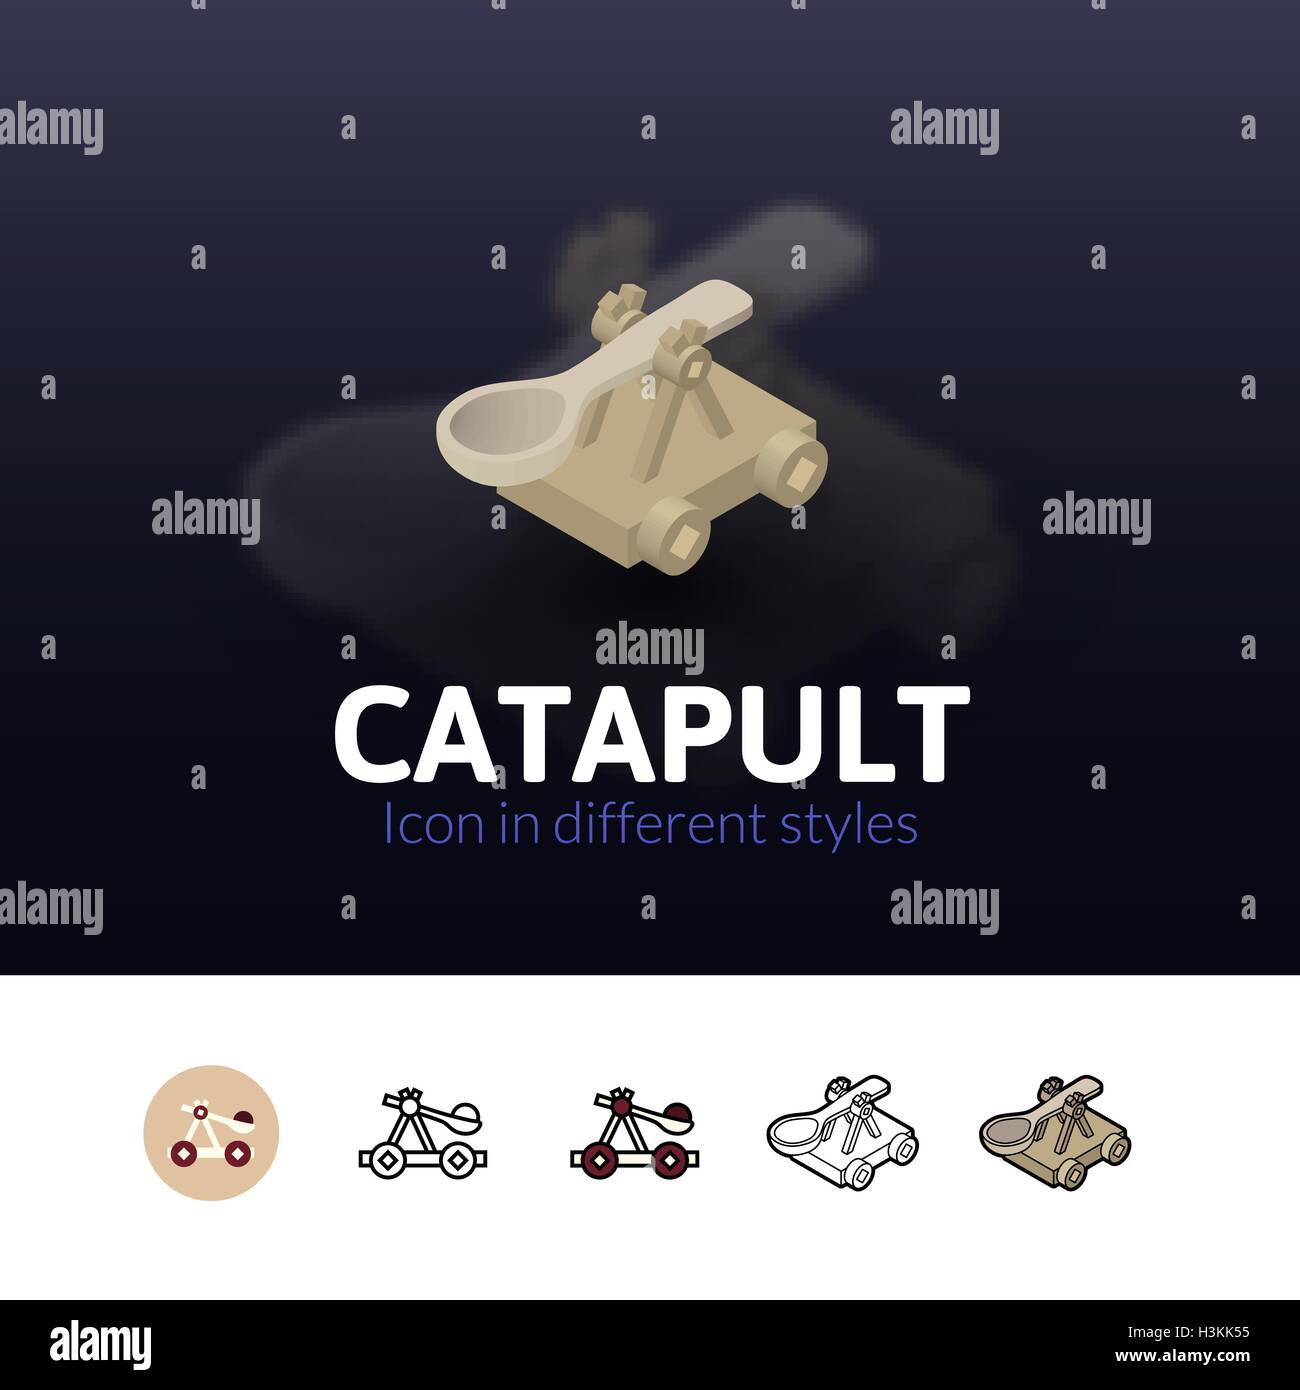 Catapult icon in different style Stock Vector